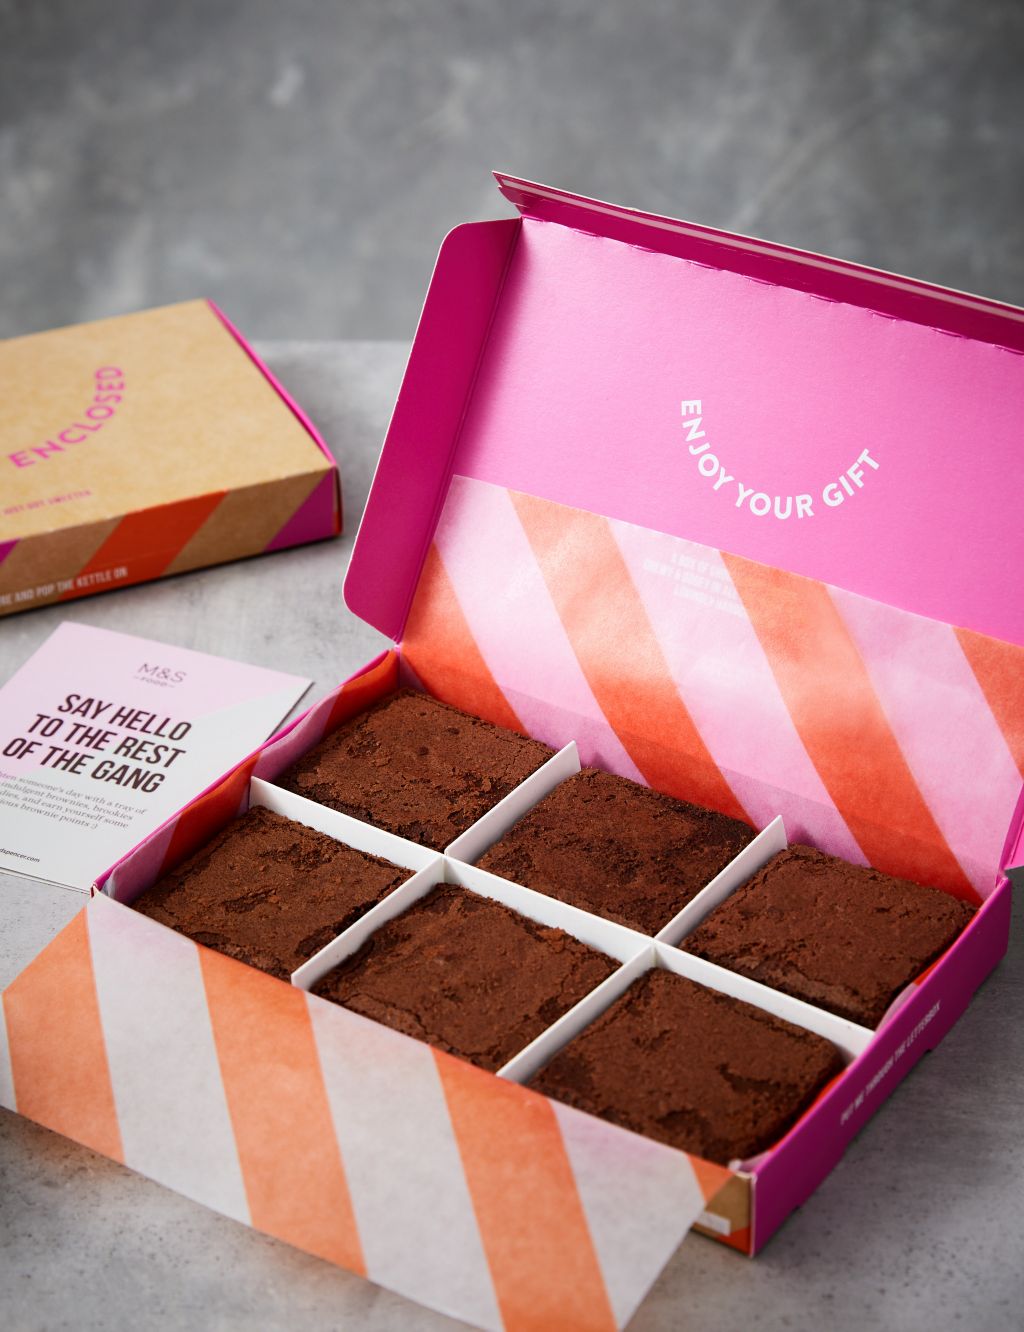 6 Indulgent Chocolate Brownies Letterbox Gift